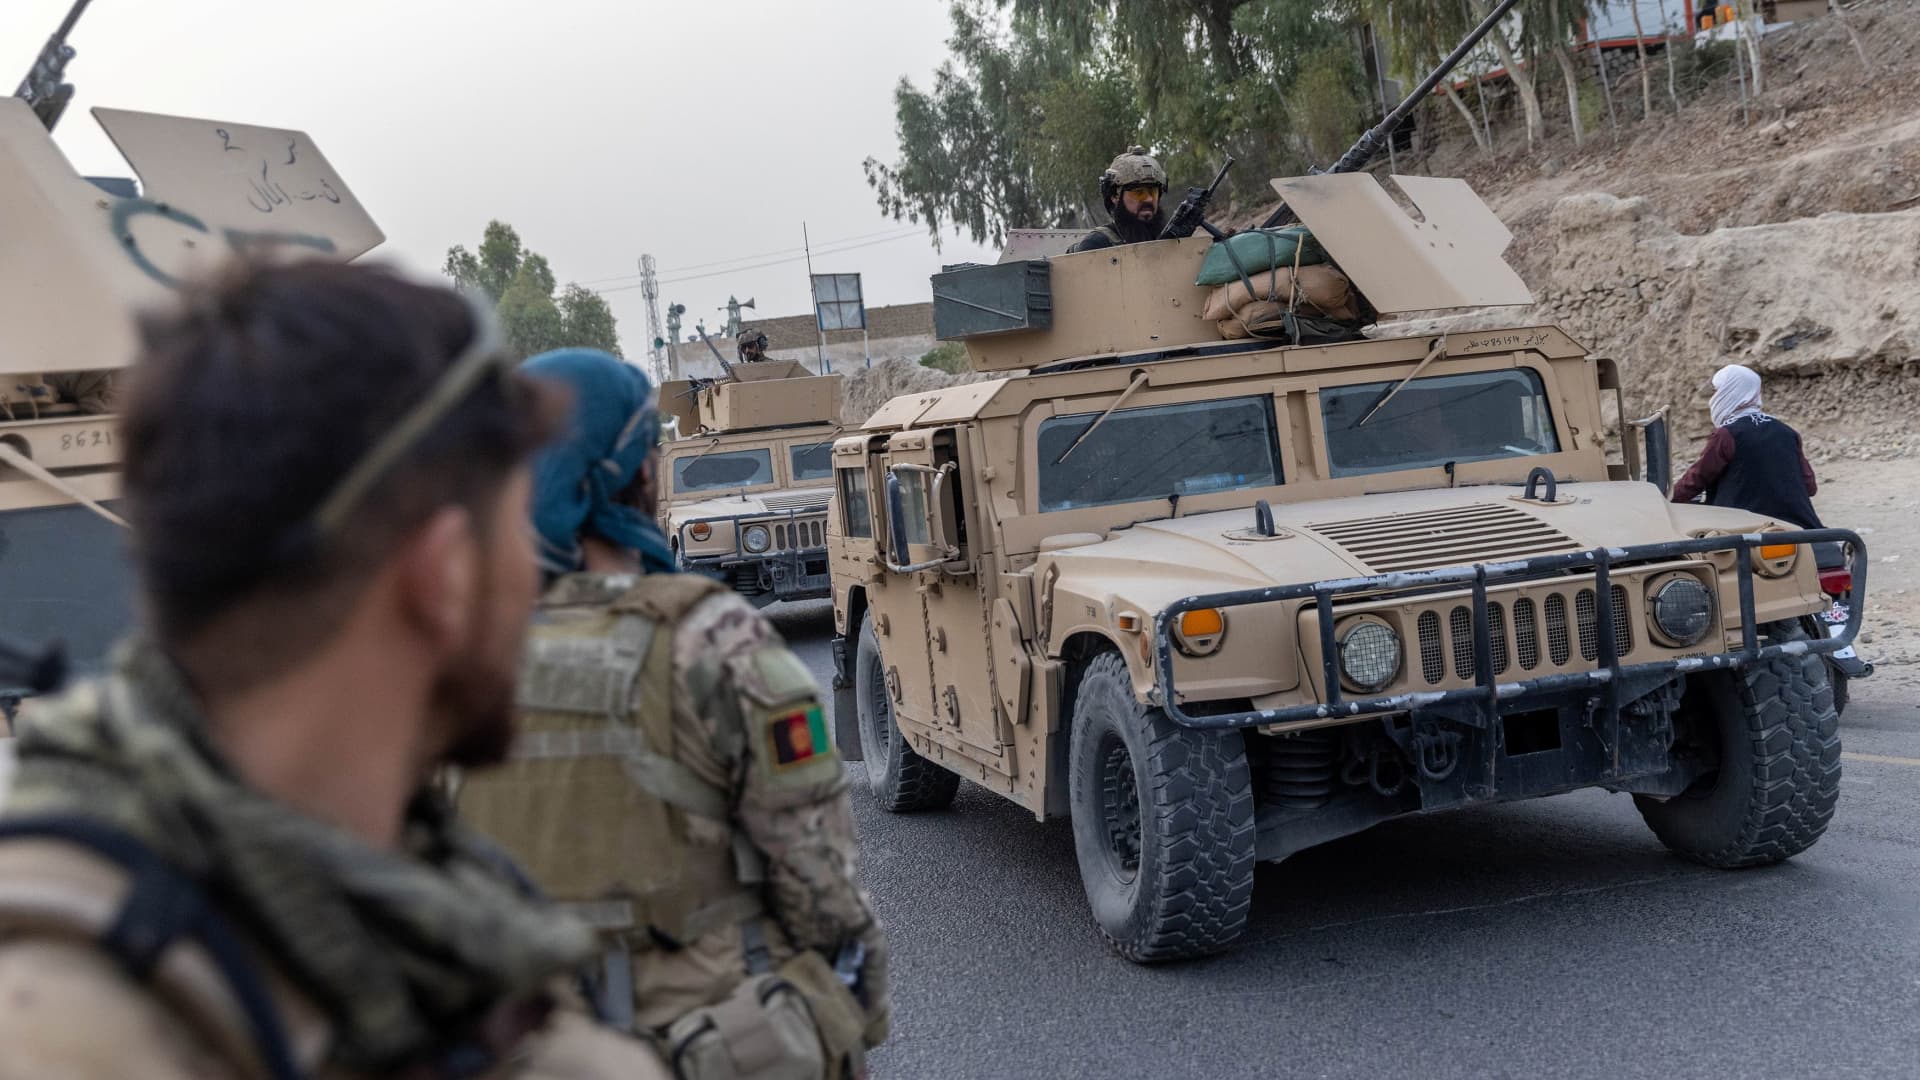 A convoy of Afghan Special Forces is seen during the rescue mission of a police officer besieged at a check post surrounded by Taliban, in Kandahar province, Afghanistan, July 13, 2021.